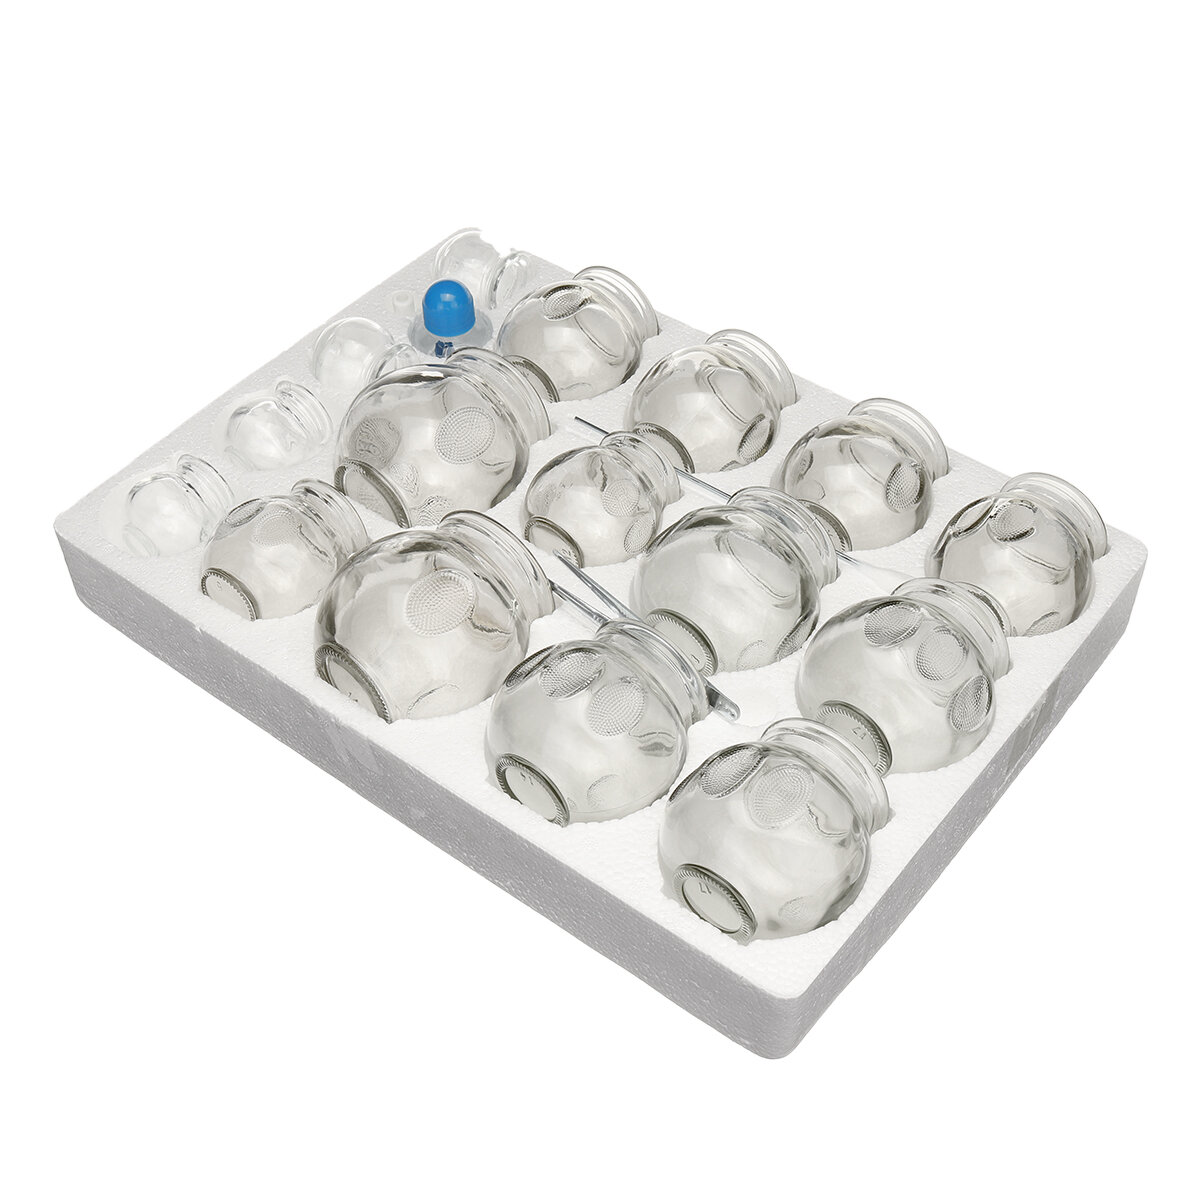 Image of 16Pcs Glass Fire Cupping Jars Set Chinese Acupuncture Vacuum Massage Therapy Device